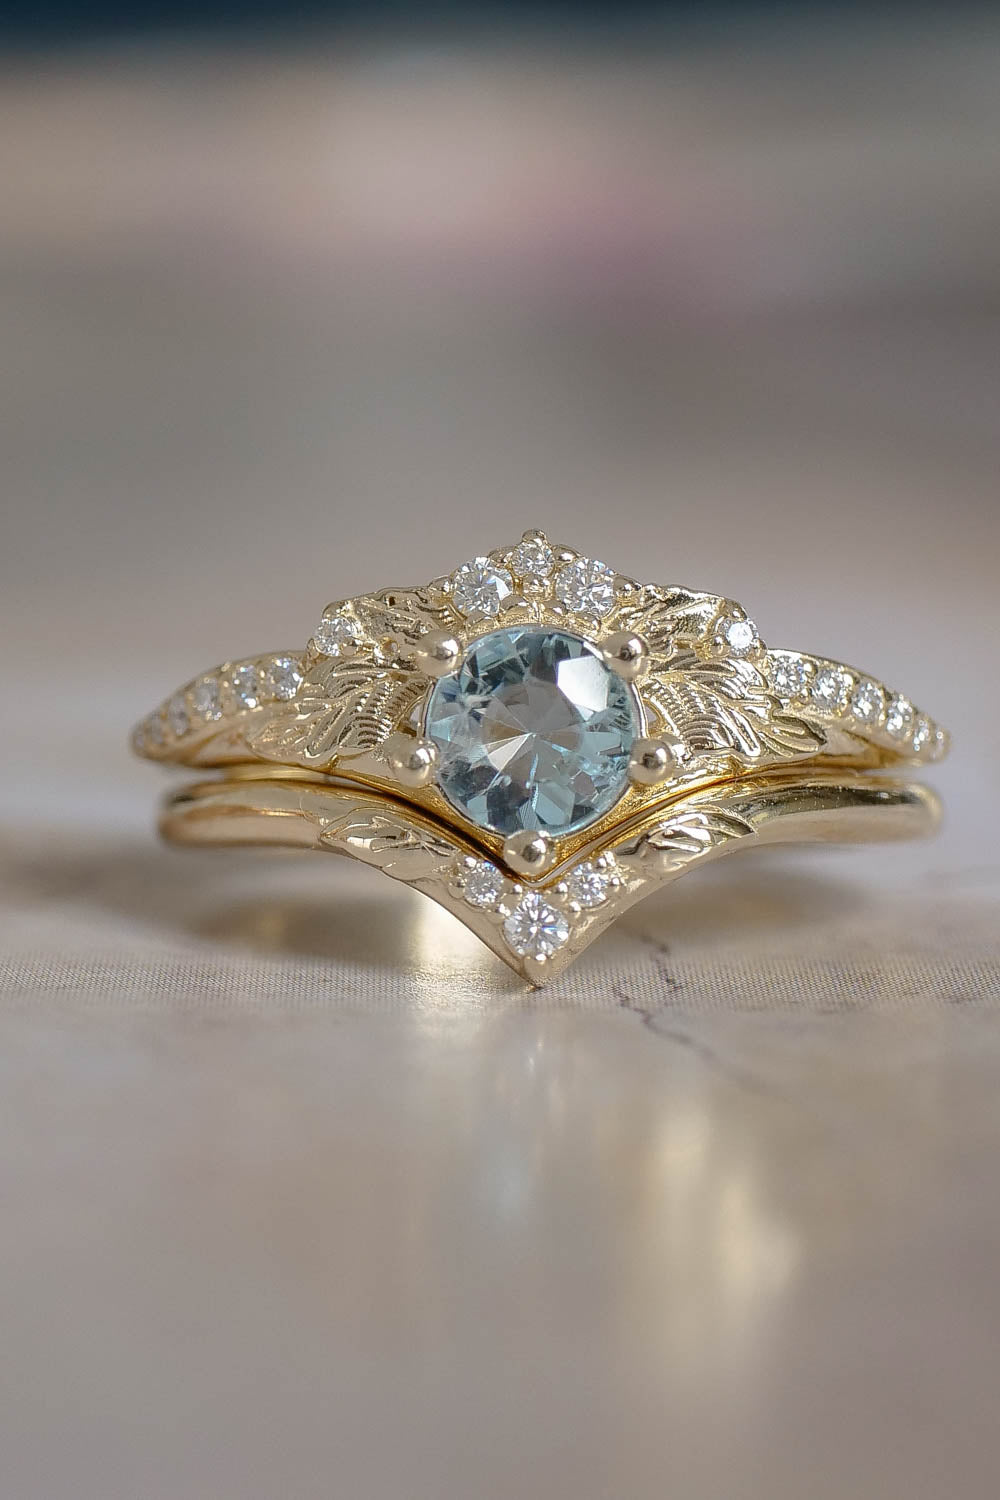 Is aquamarine a good choice for an engagement ring? | CustomMade.com